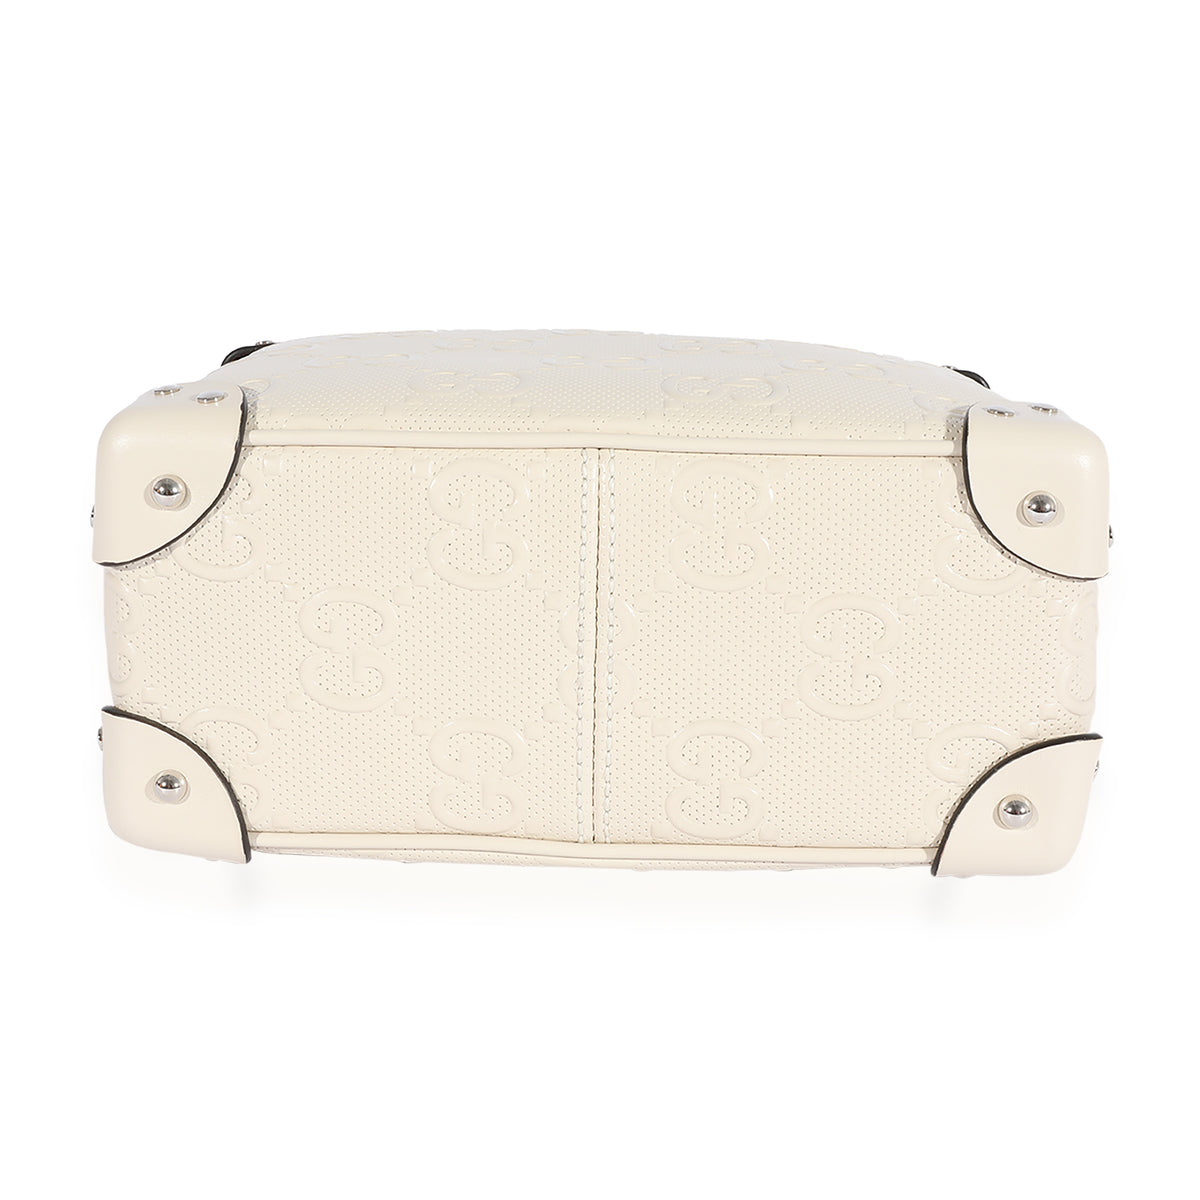 White Gucci GG Embossed Perforated Square Bag – Designer Revival